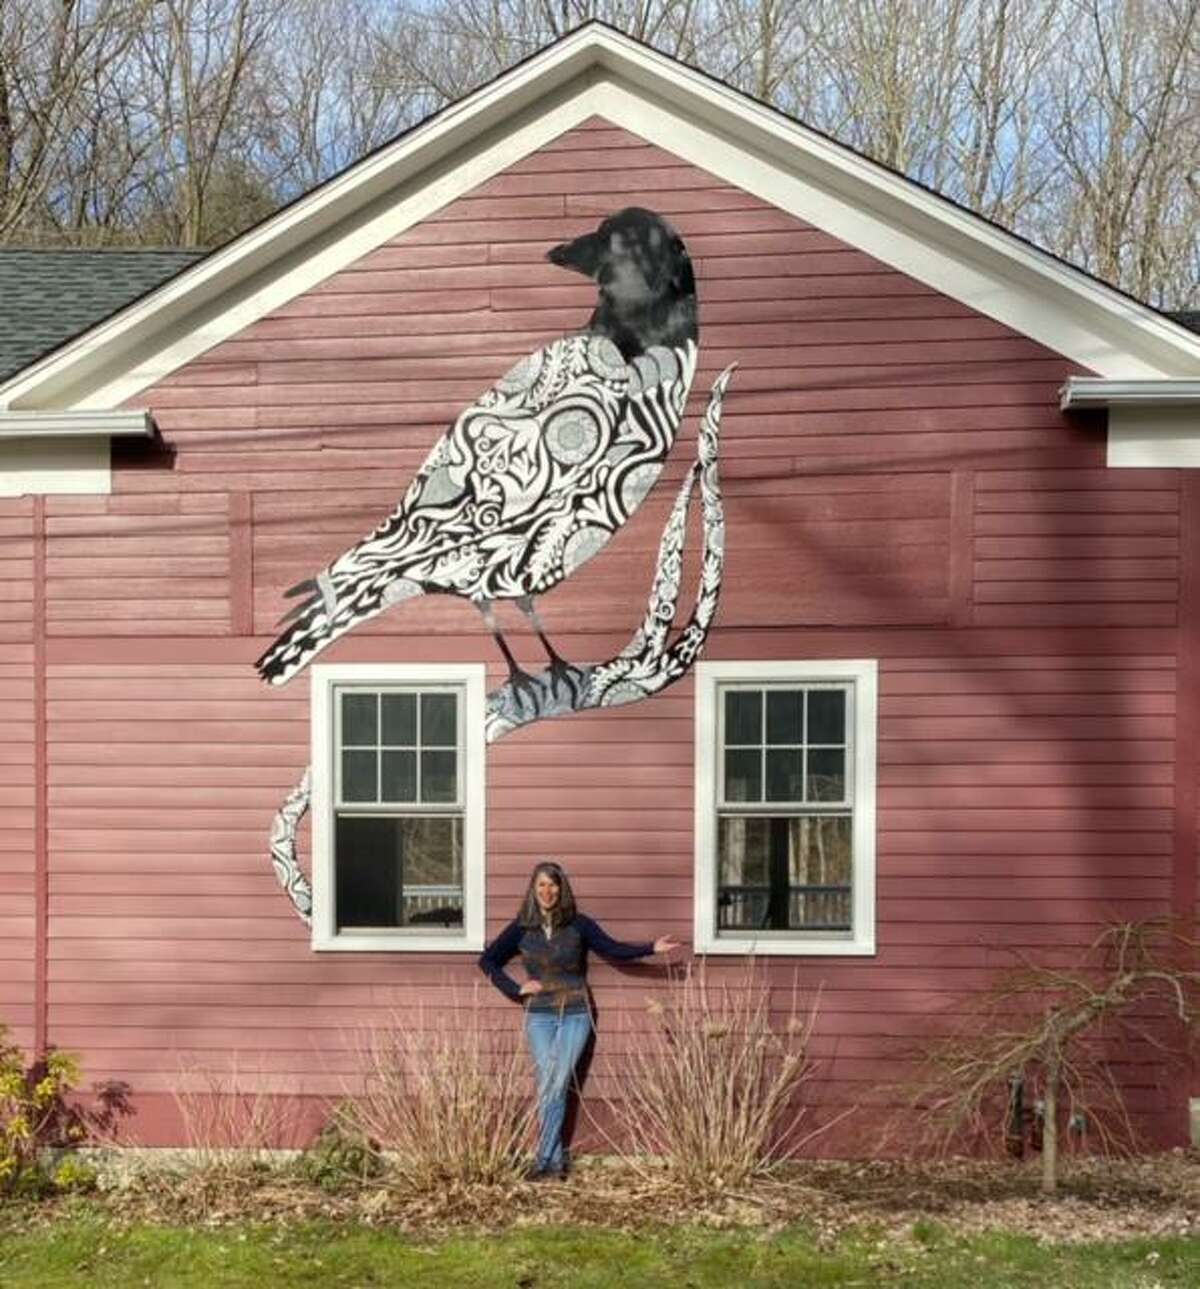 Artist Danielle Mailer's Night Bird is now on the red barn exterior of Merryall Art Center in New Milford, as it debuts its new season of art, theater and music.